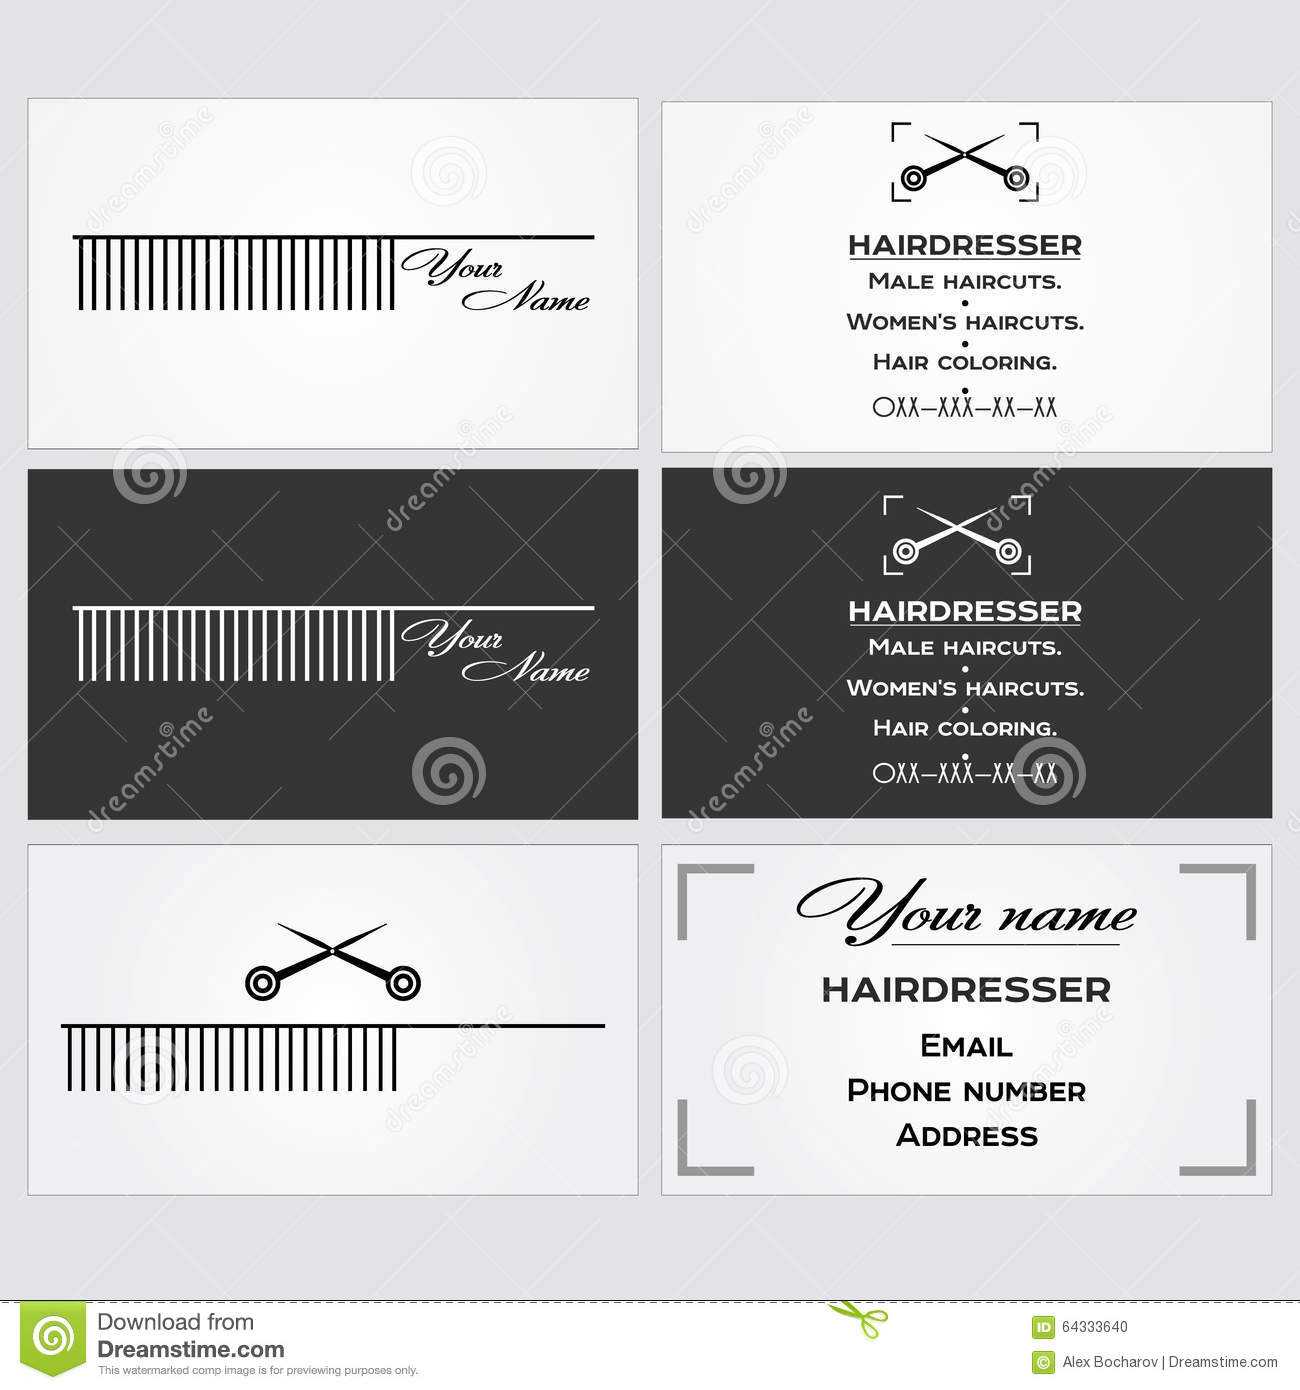 Hairdresser Business Card Templates Free – Calep.midnightpig.co For Hairdresser Business Card Templates Free